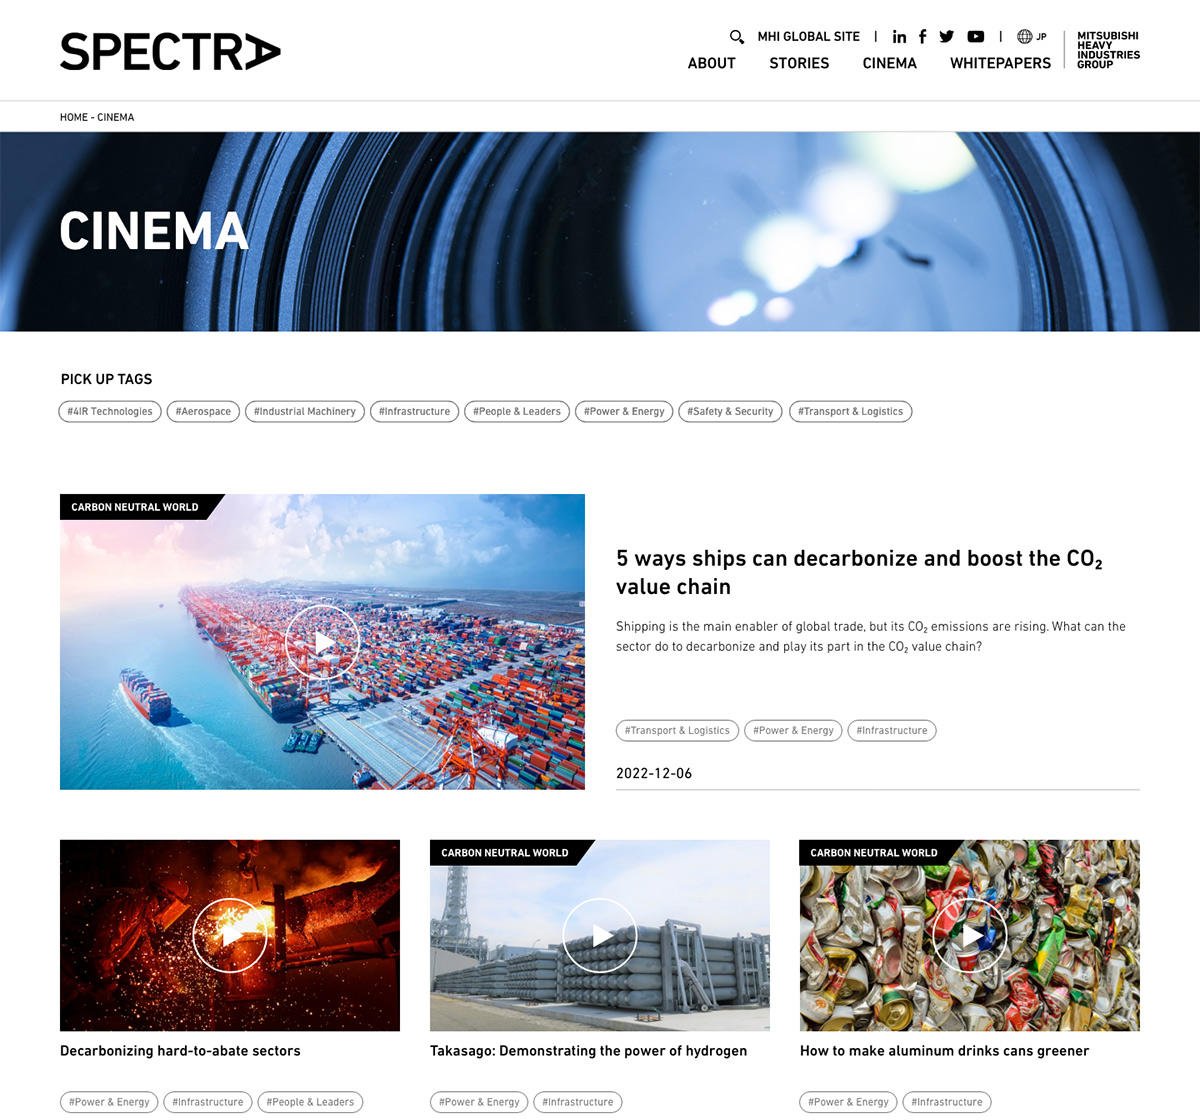 Spectra Cinema is home to our explainer videos, animations and expert viewpoints